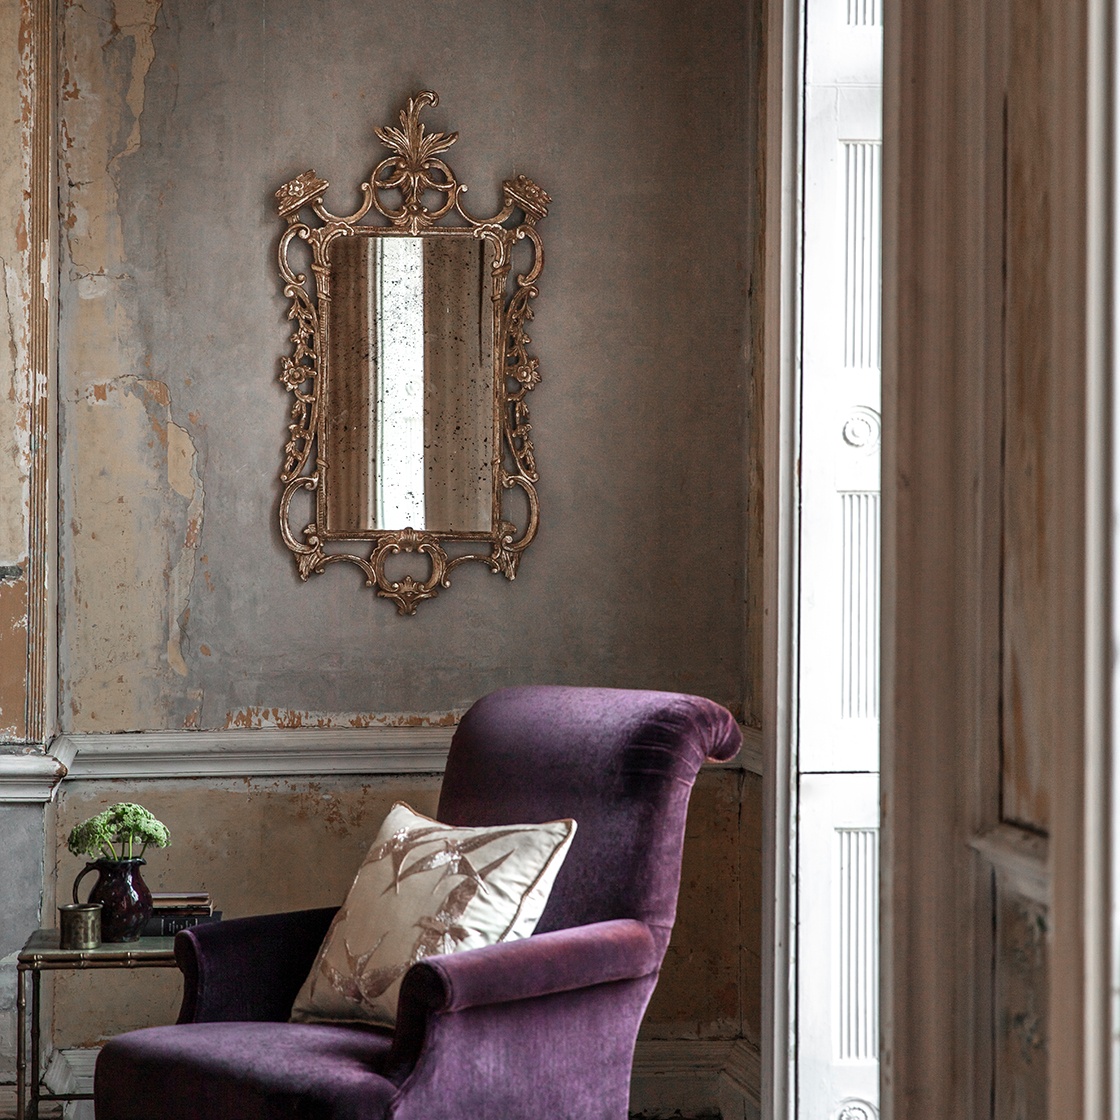 Chippendale mirror in Burnt Gold with Palmerston chair and Elvira cushion - Beaumont & Fletcher